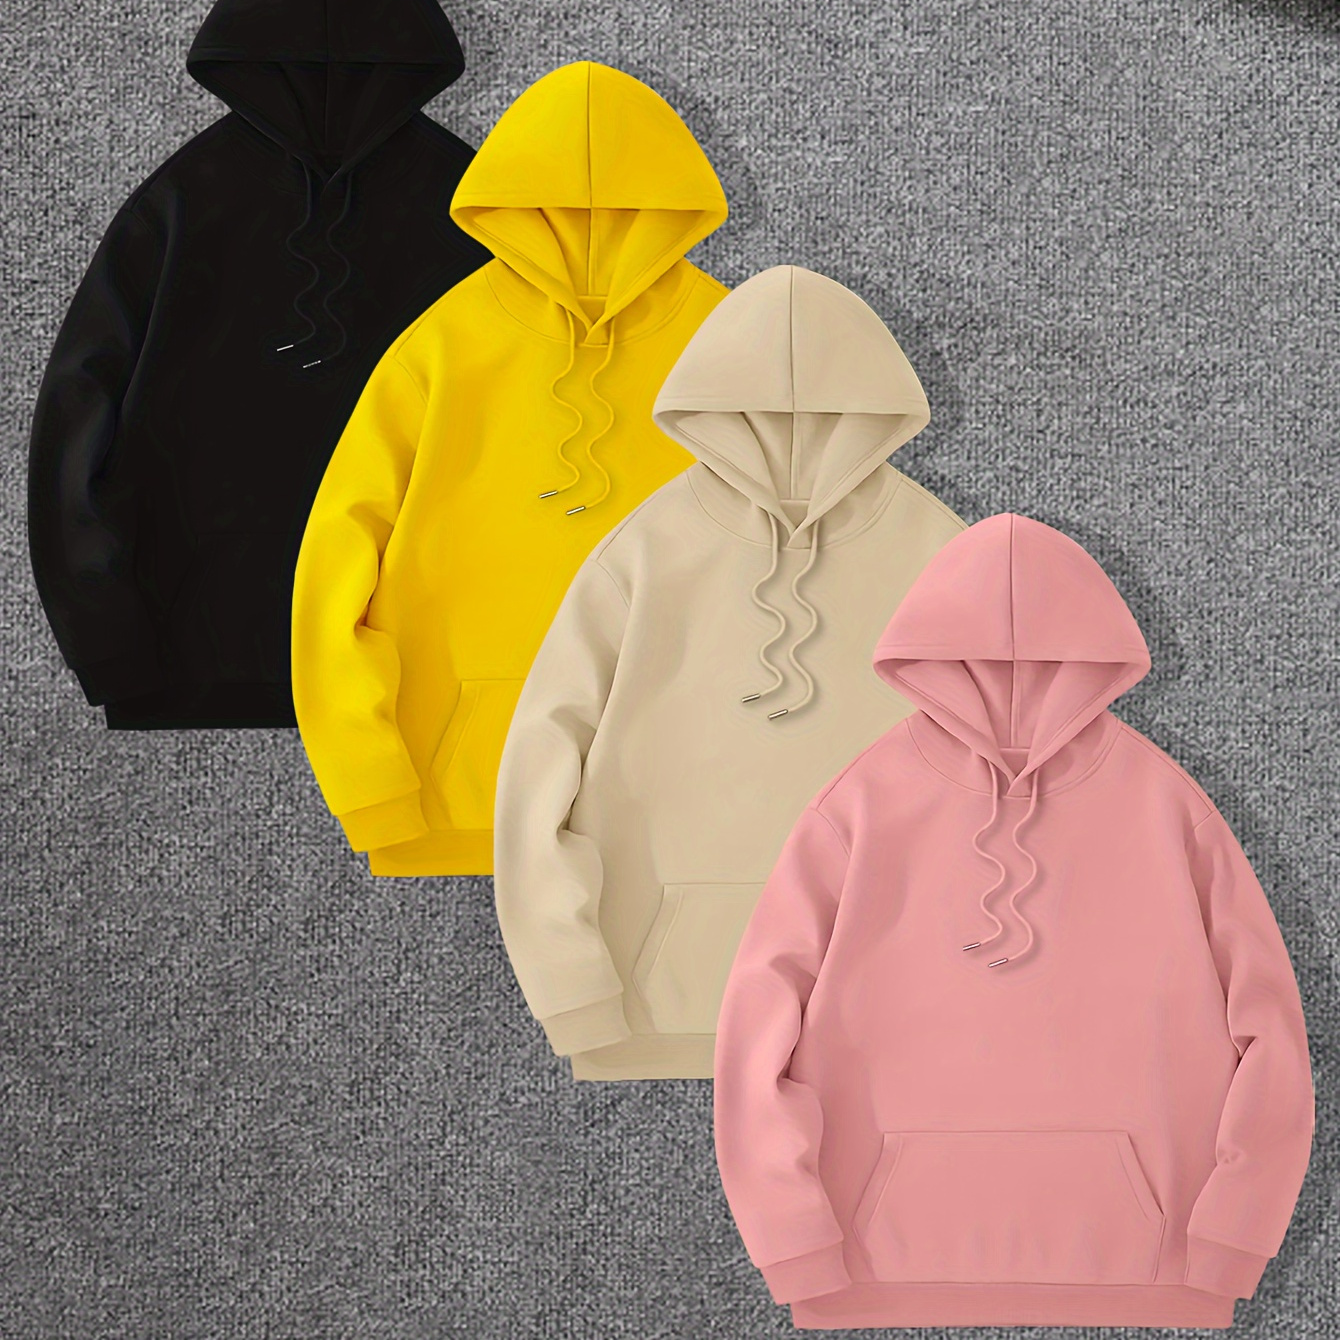 

4pcs Cool Hoodies Set For Men, Men's Casual Basic Solid Hooded Sweatshirt Streetwear For Winter Fall, As Gifts